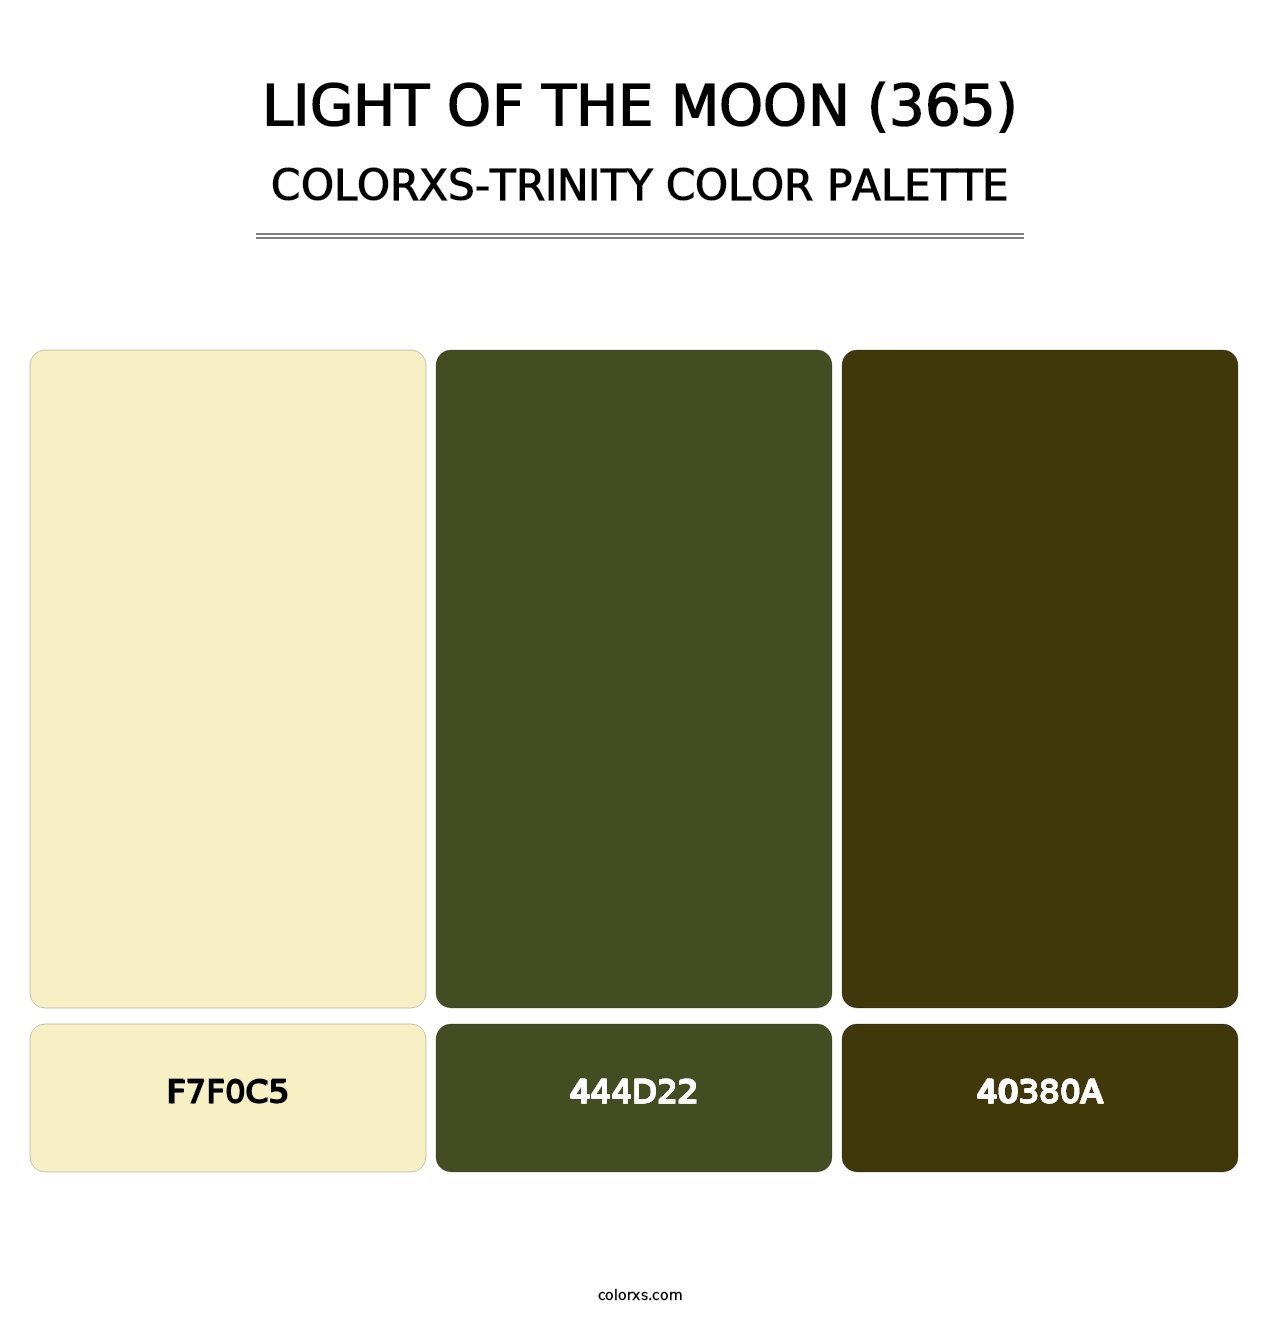 Light of the Moon (365) - Colorxs Trinity Palette